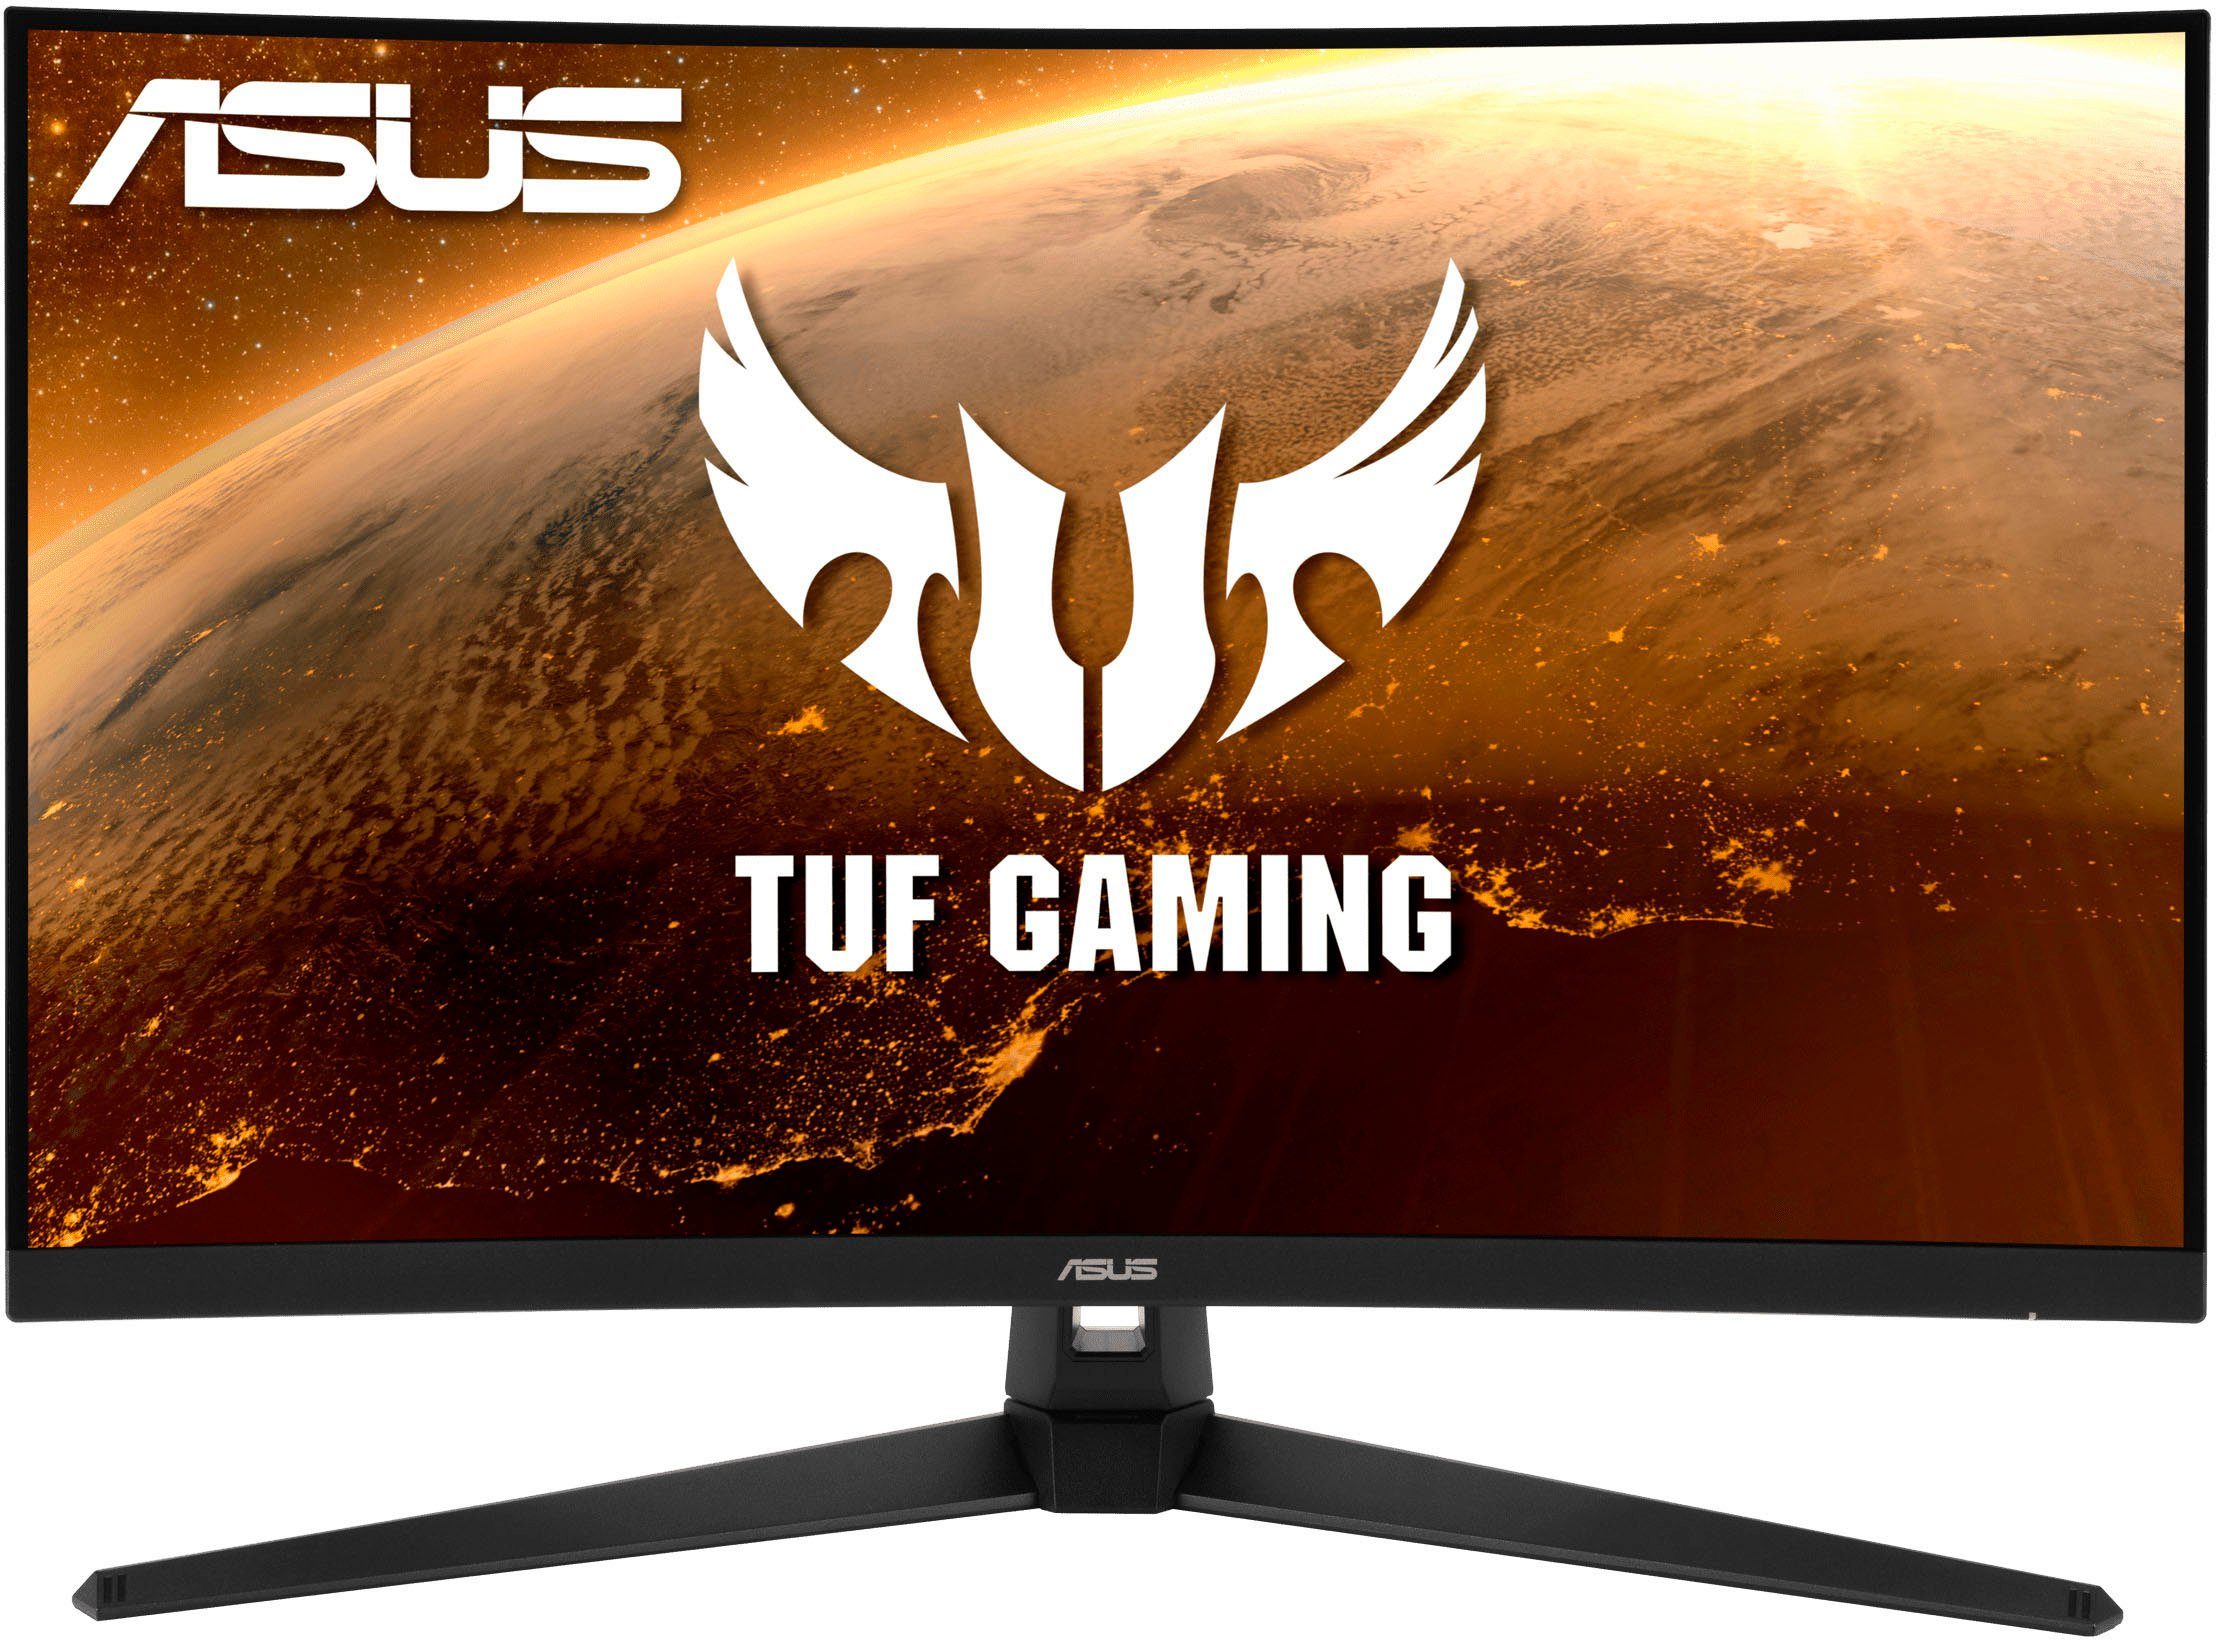 Reaktionszeit, LED) x 165 ms Curved-Gaming-Monitor 1 Hz, 1440 cm/31,5 QHD, VG32VQ1BR ", (80 2560 px, Asus